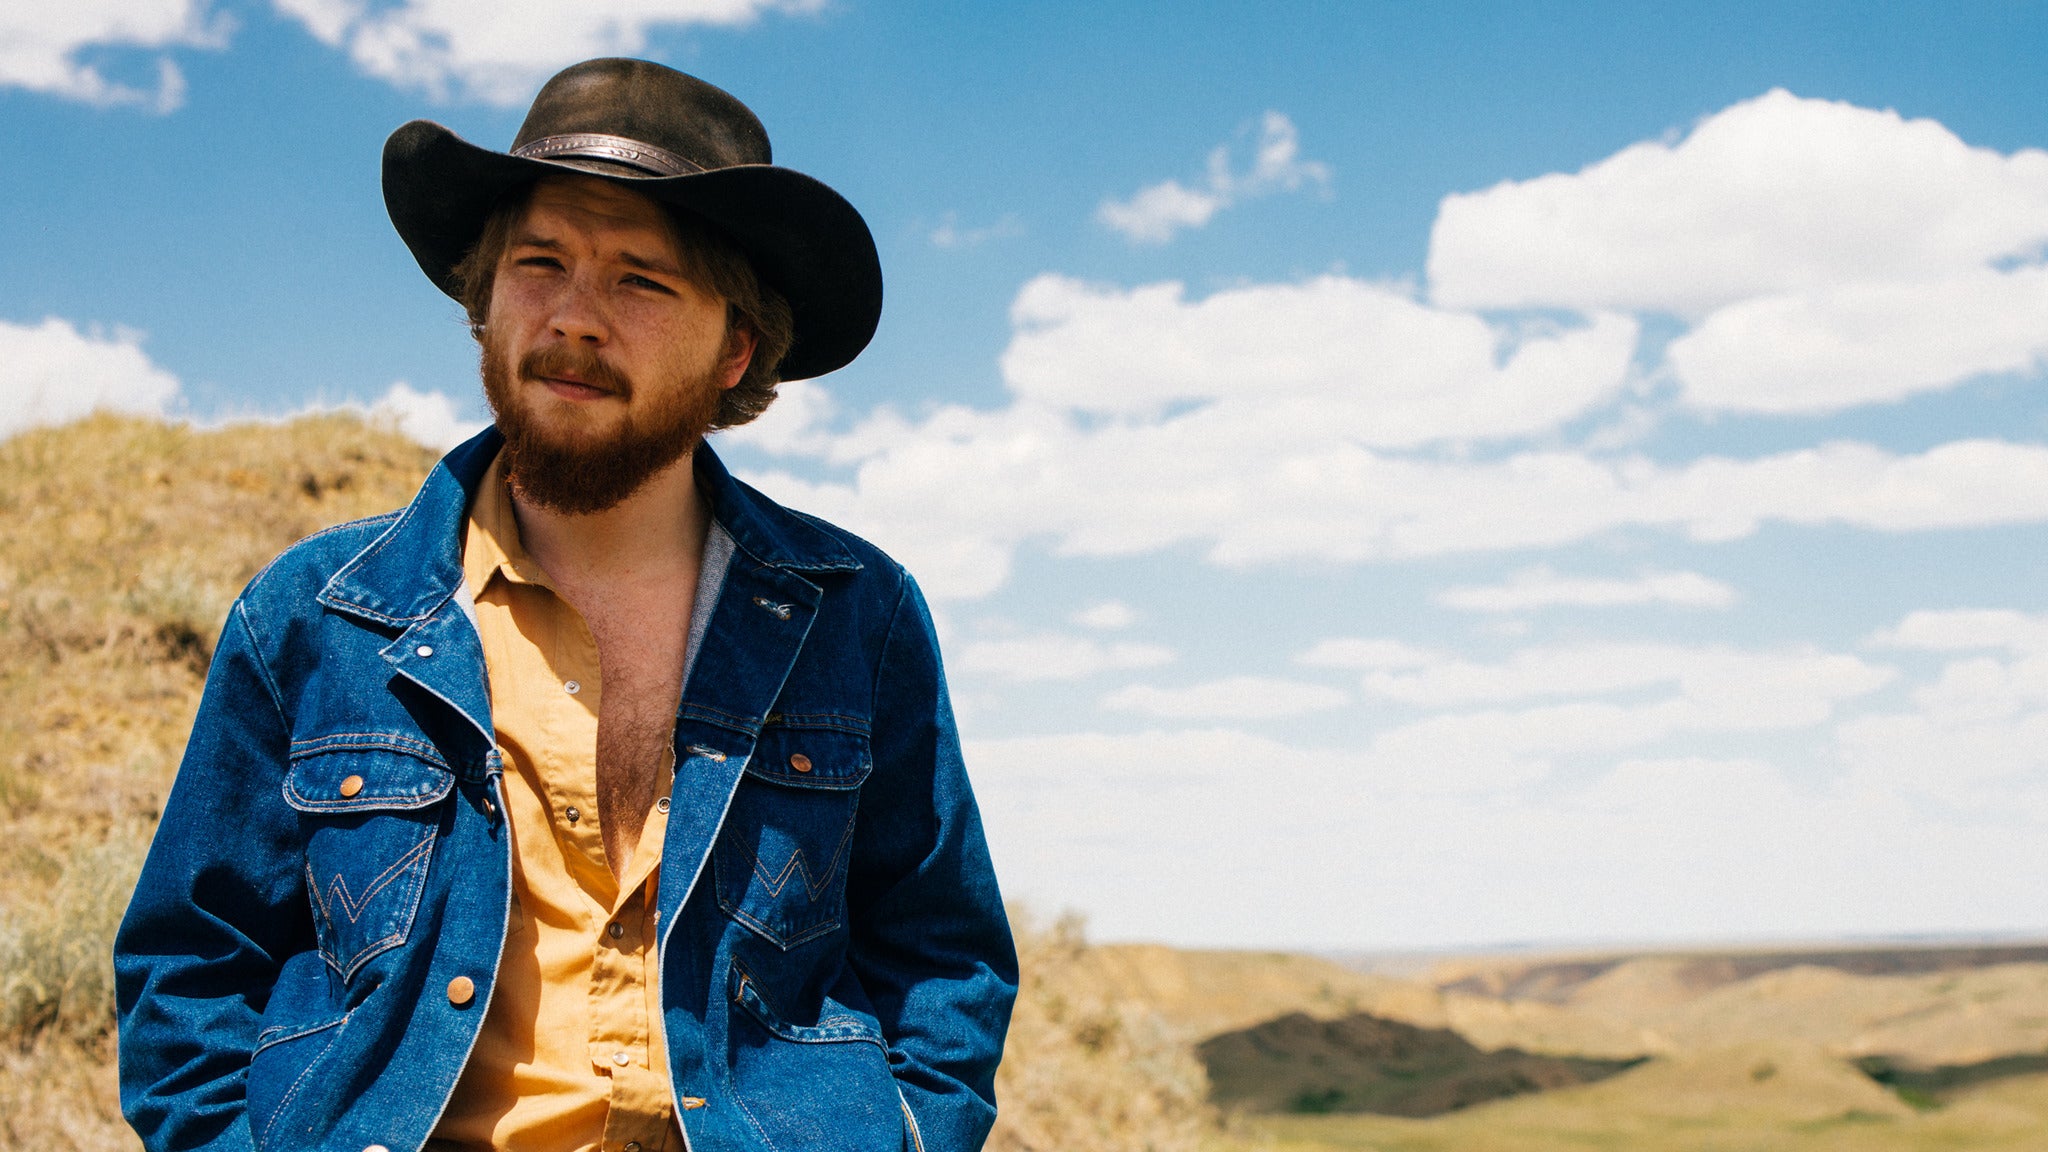 Colter Wall in Knoxville promo photo for Fan Club presale offer code